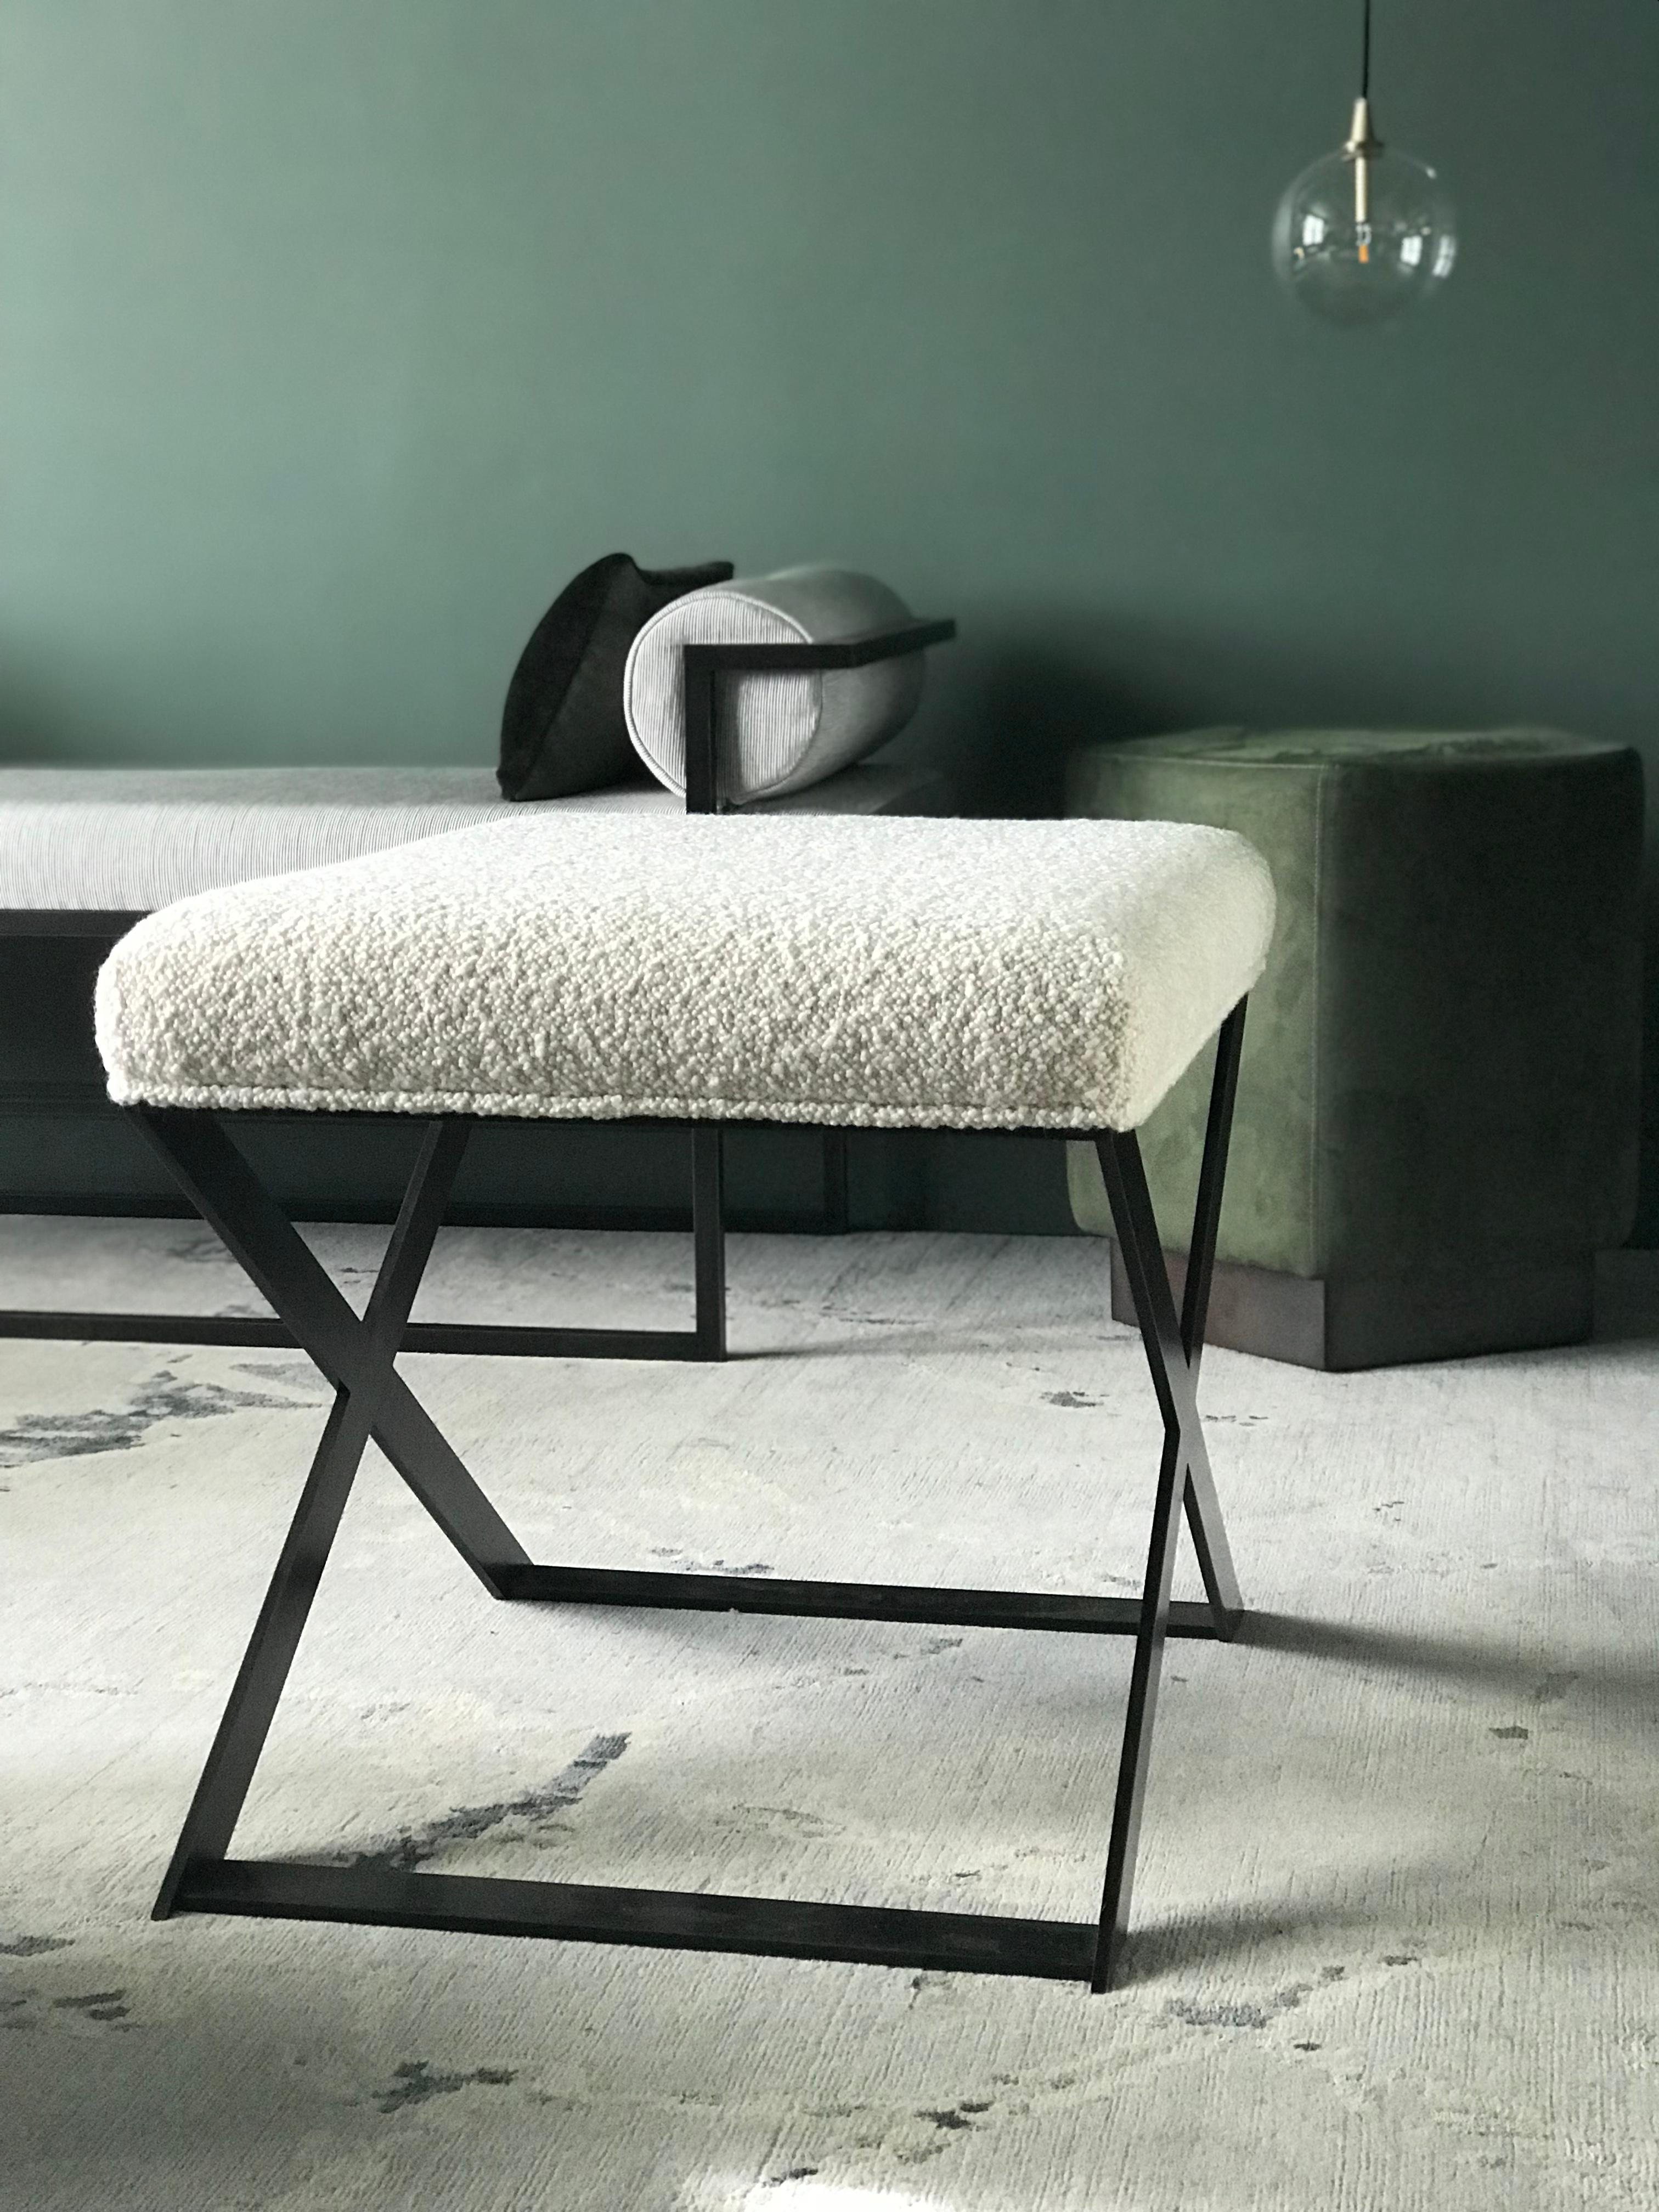 Its shape radiates dominance while its aesthetic harmonises with Casa Botelho’s signature style, Masculine Glamour. The X-leg stool will complement a variety of spaces from the bedroom to the living room, with its distinctive combination of hard and